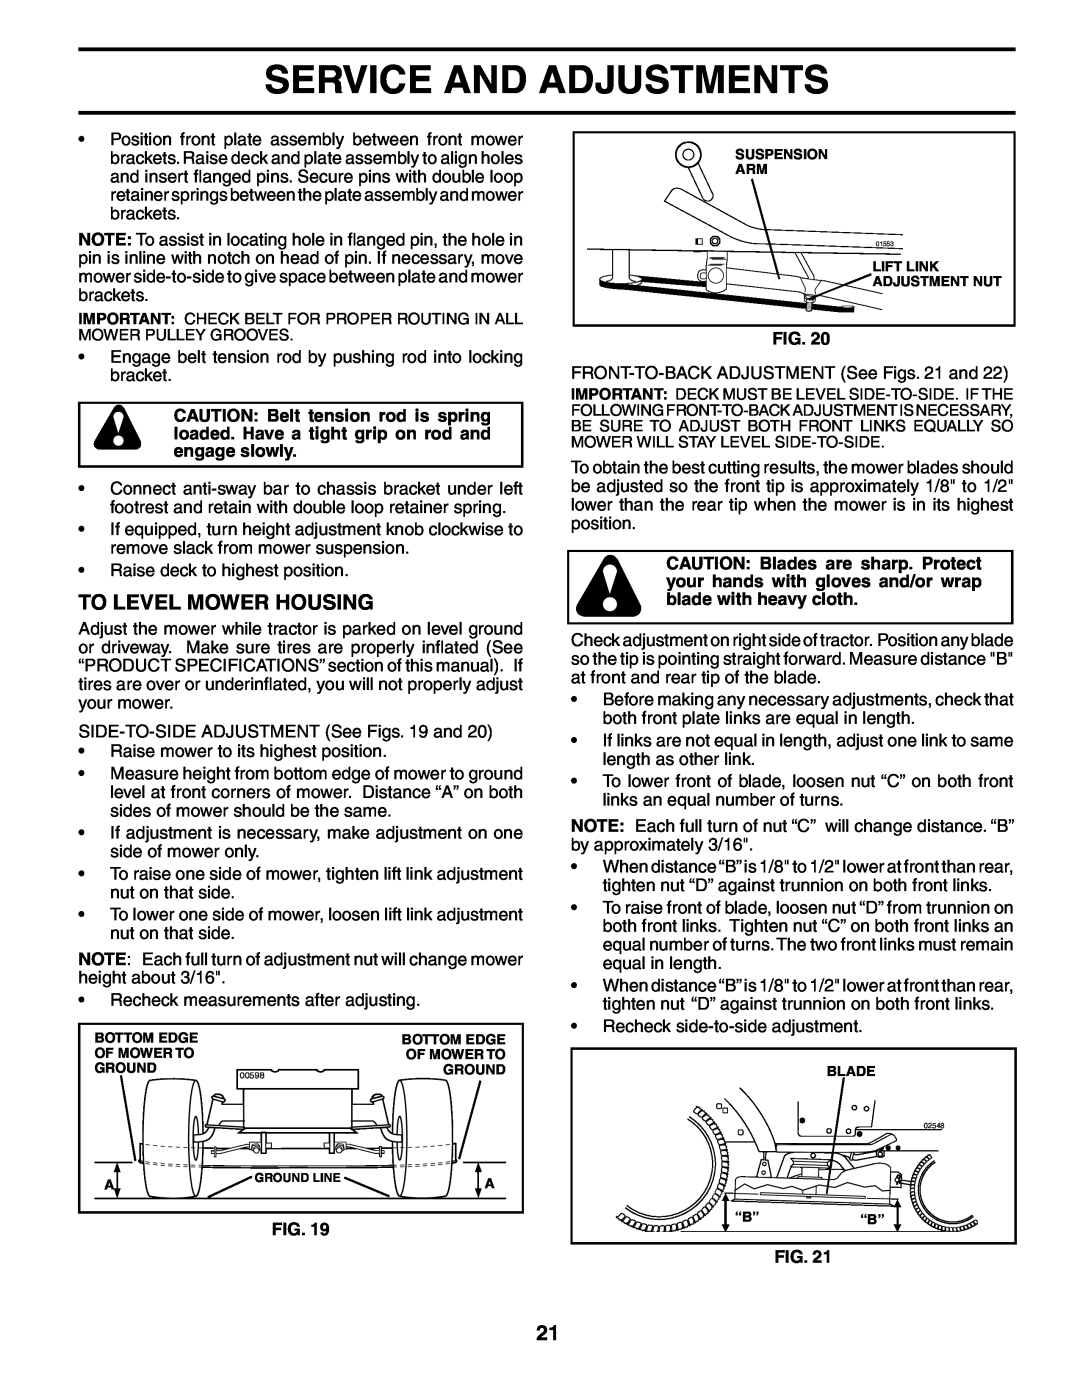 Poulan 195854 manual To Level Mower Housing, Service And Adjustments 